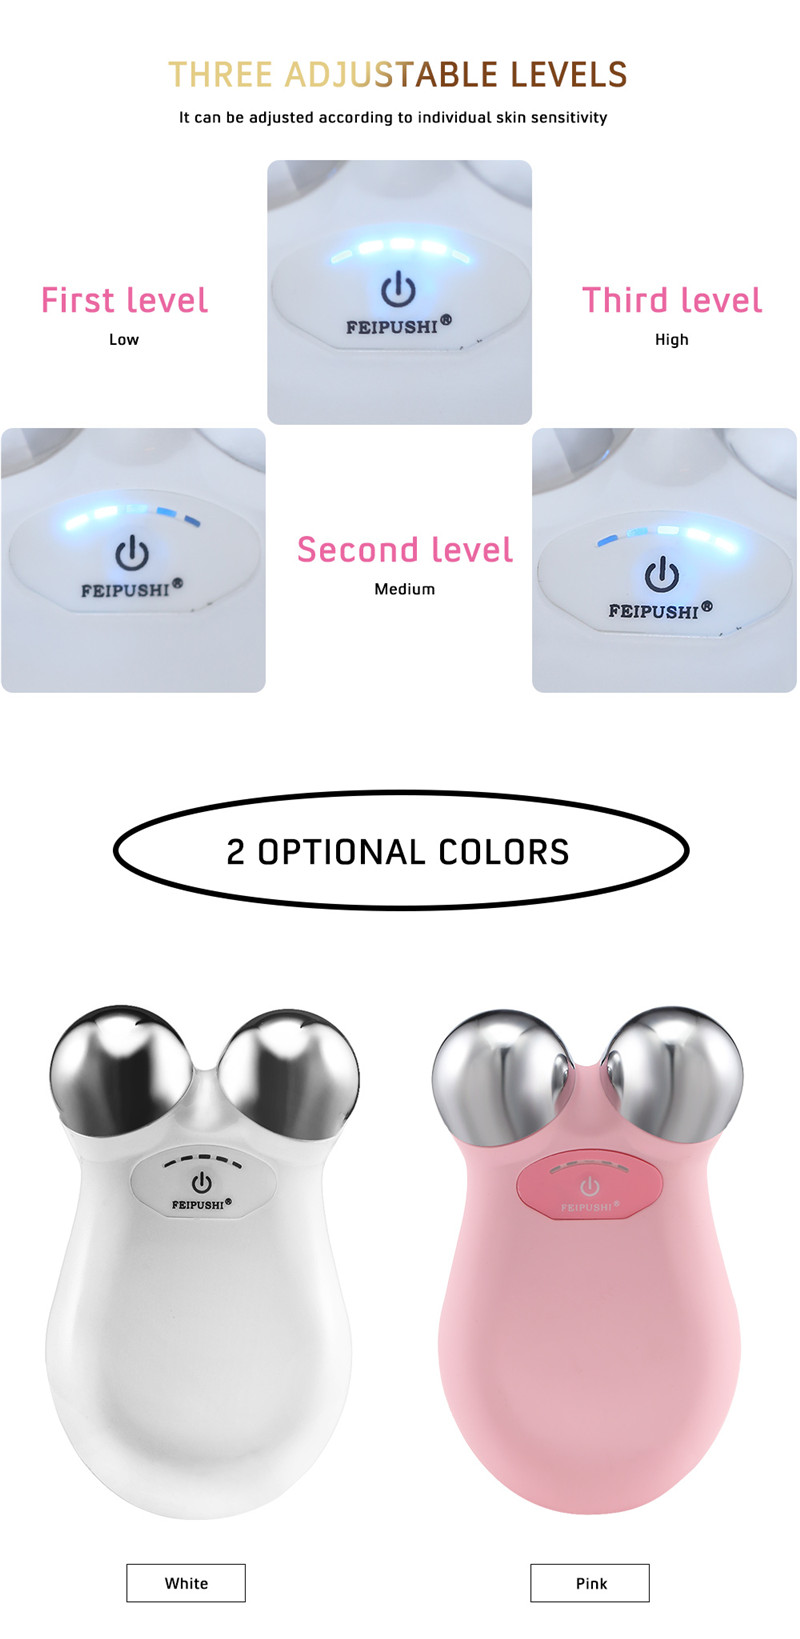 FEIPUSHI Skin Tightening Face Lifting Beauty Device